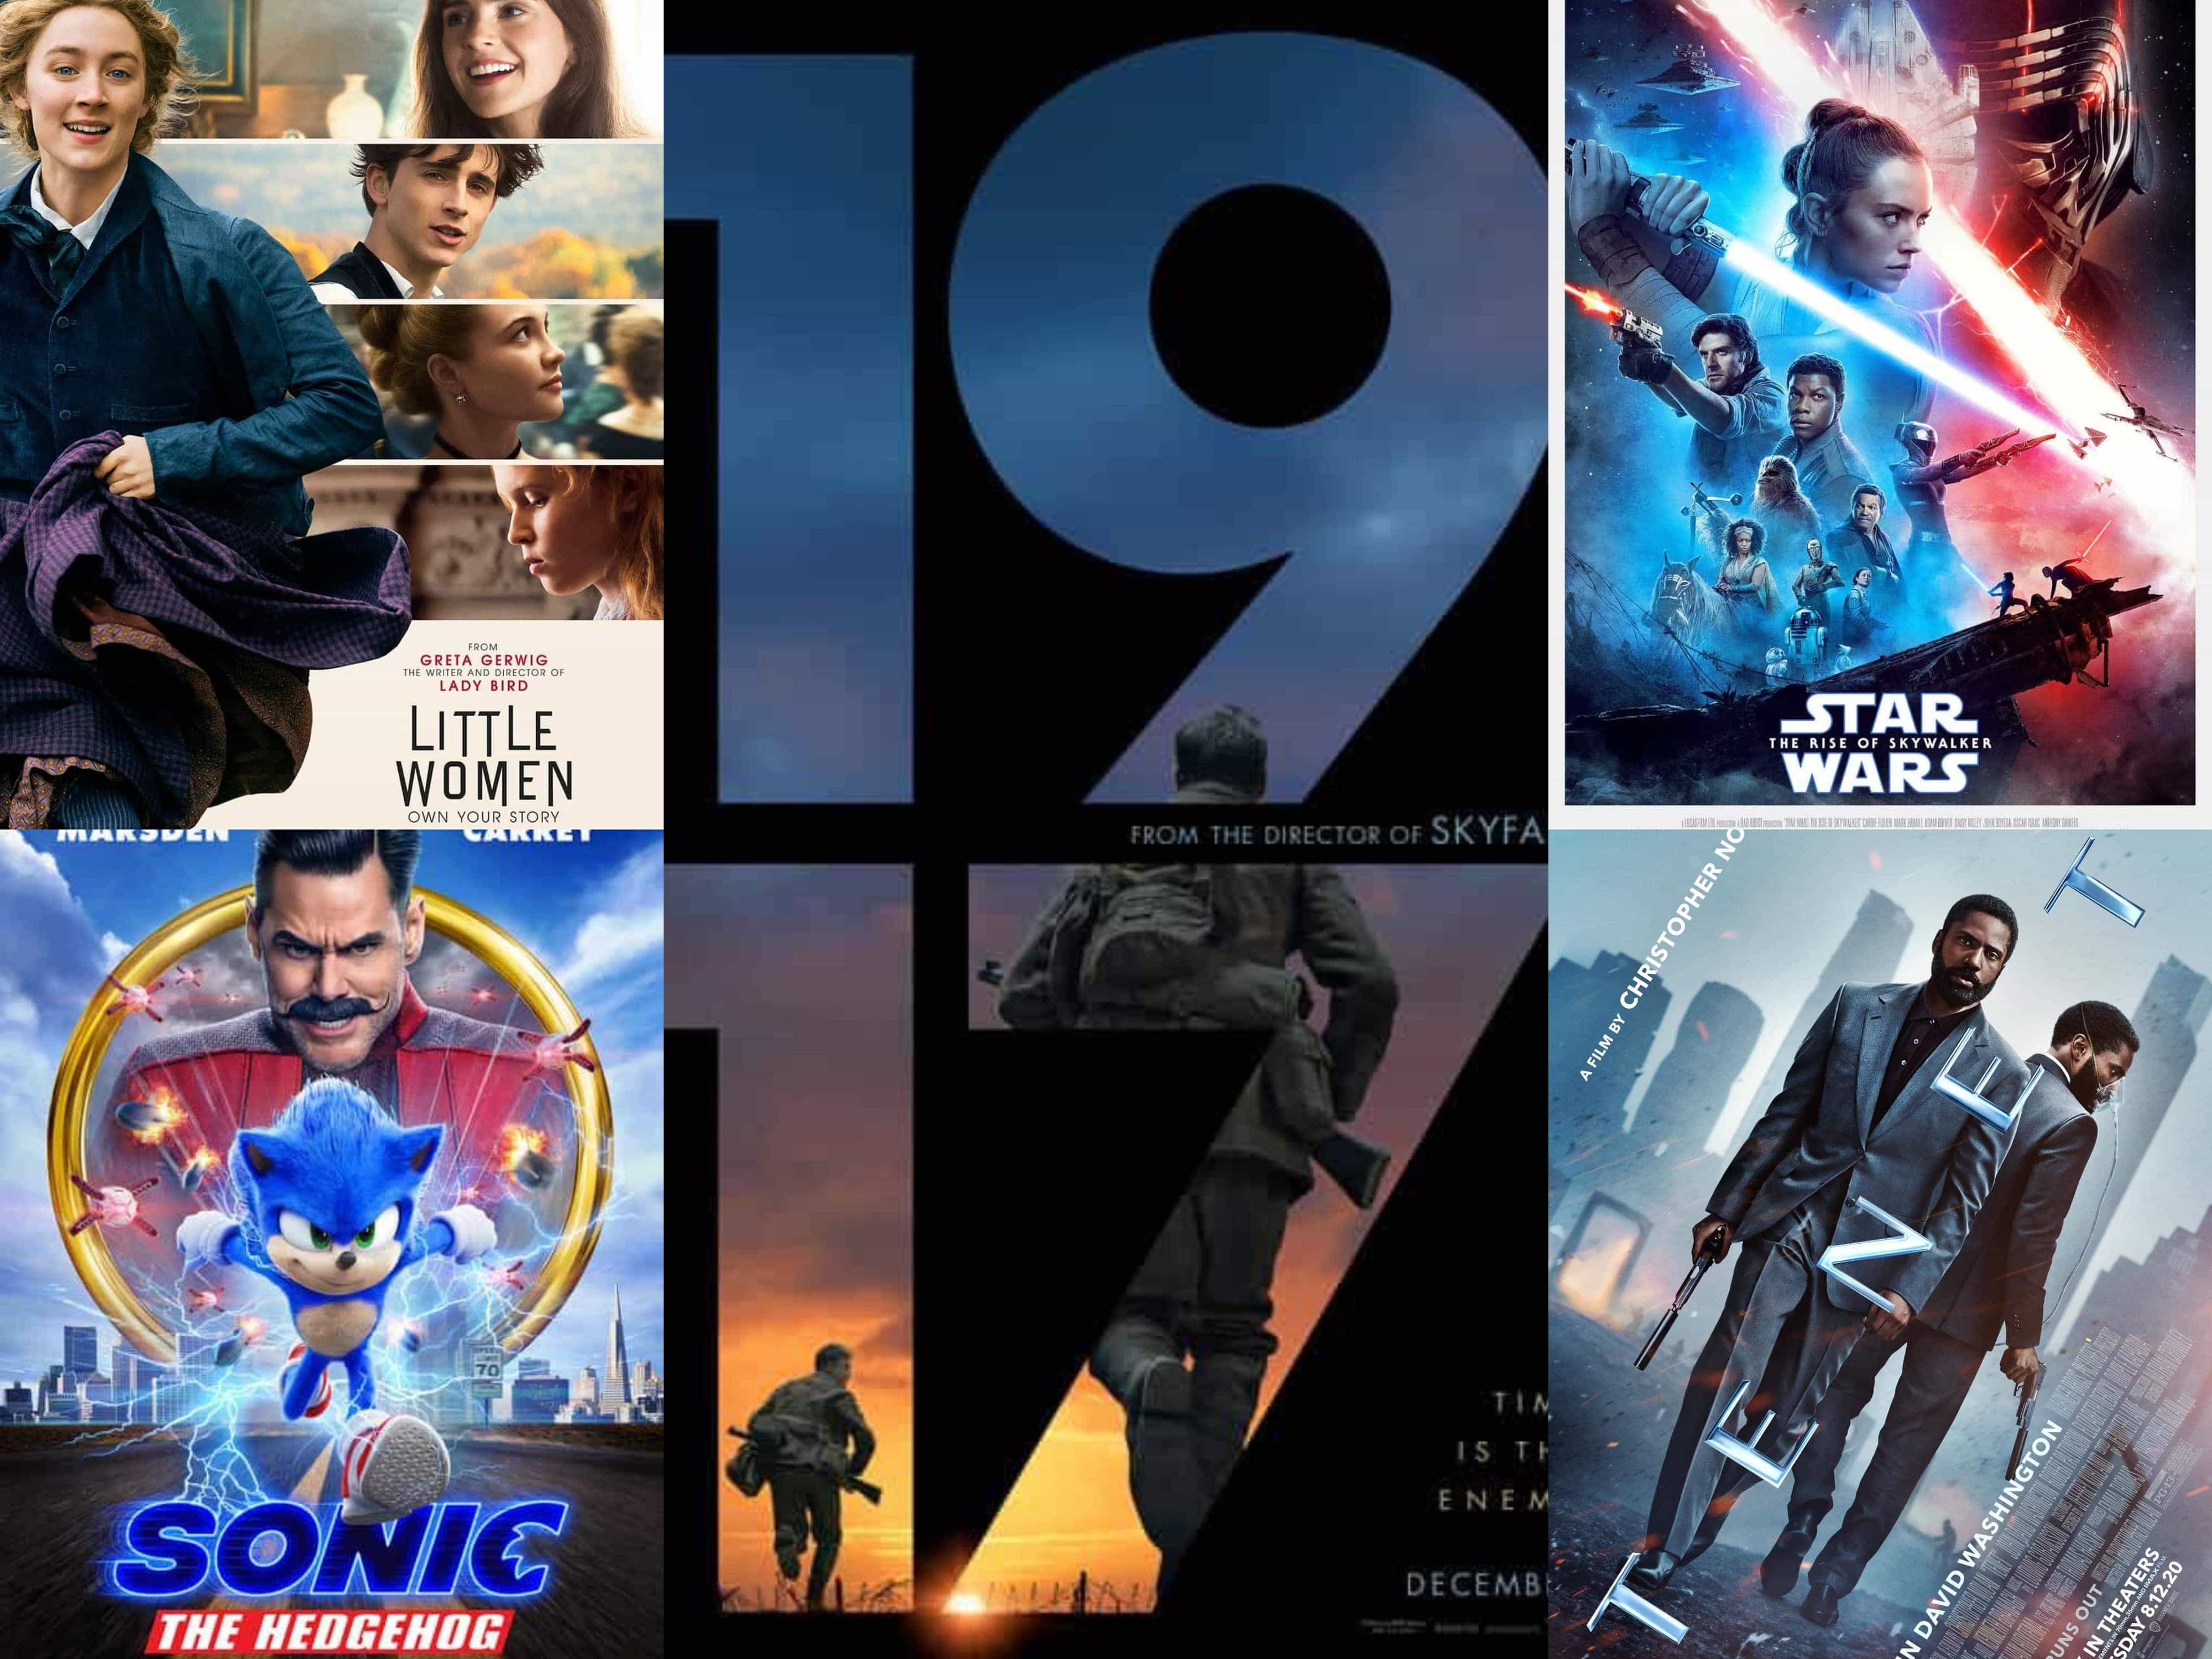 Top Grossing Movies 2020 UK: The cinema industry in the UK saw closures and reduced capacity for most of the year, 1917 released in January was the top movie of the year